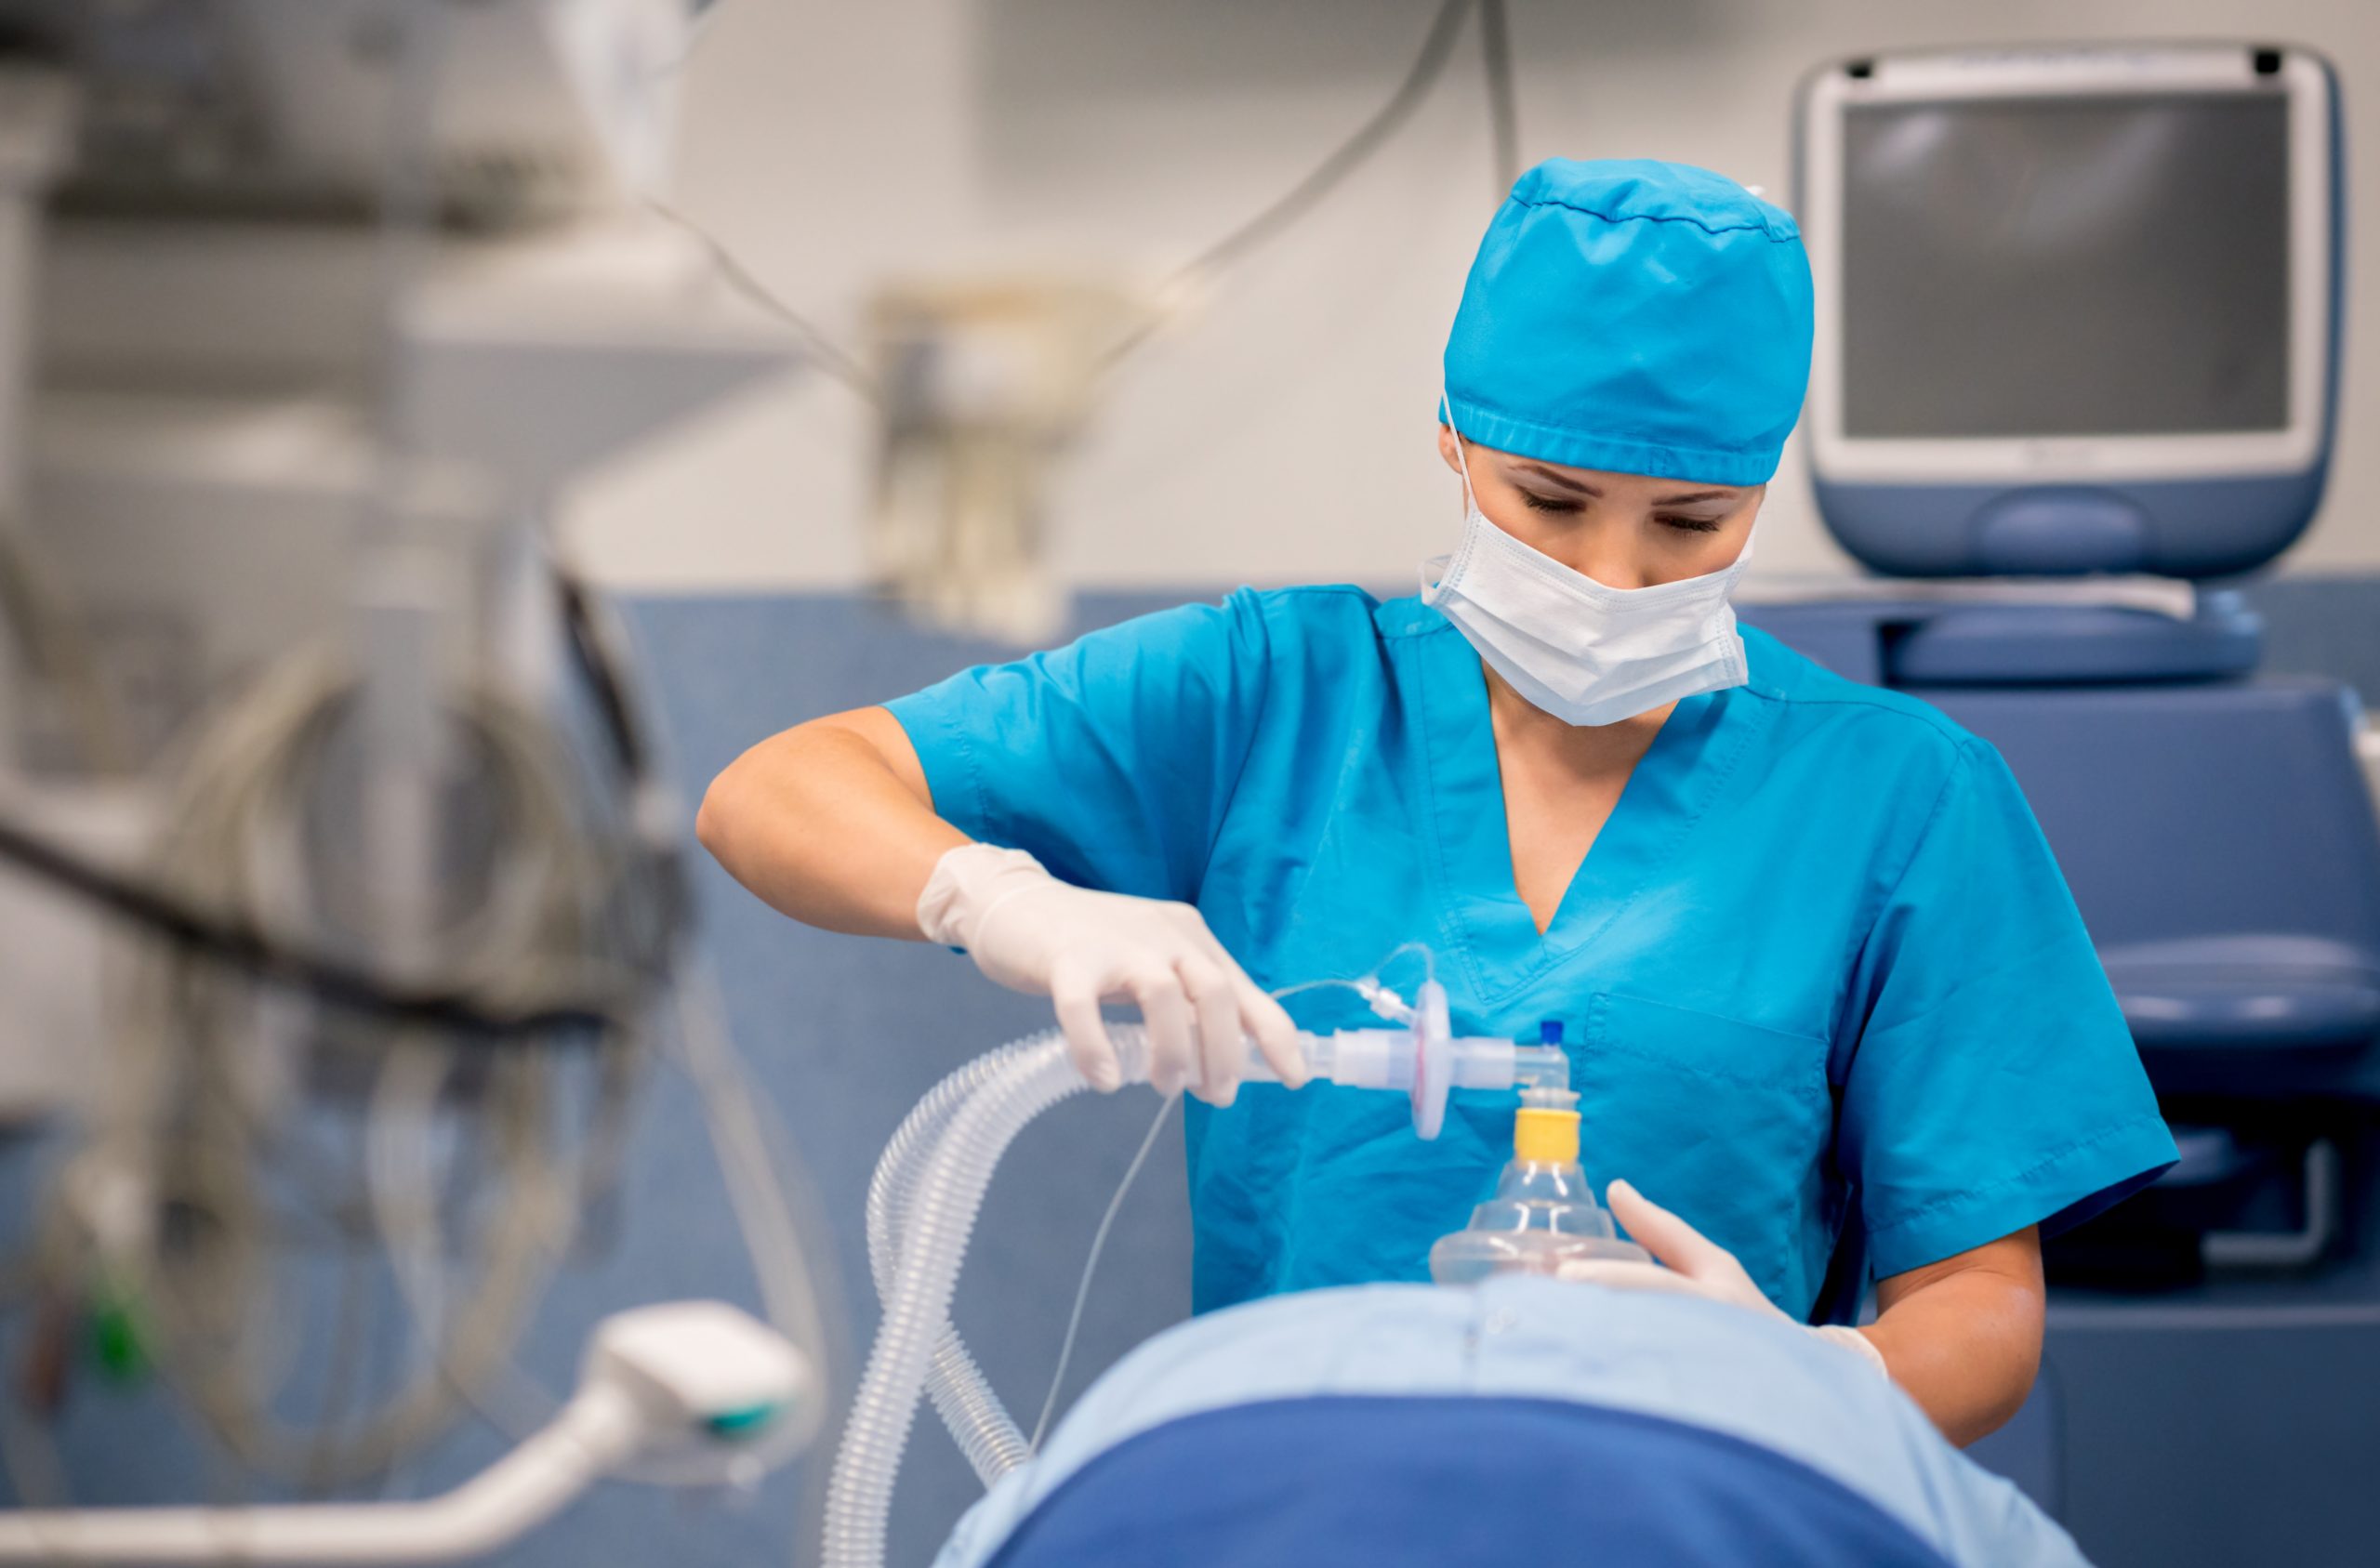 How Much Do Anesthesiologists Make?